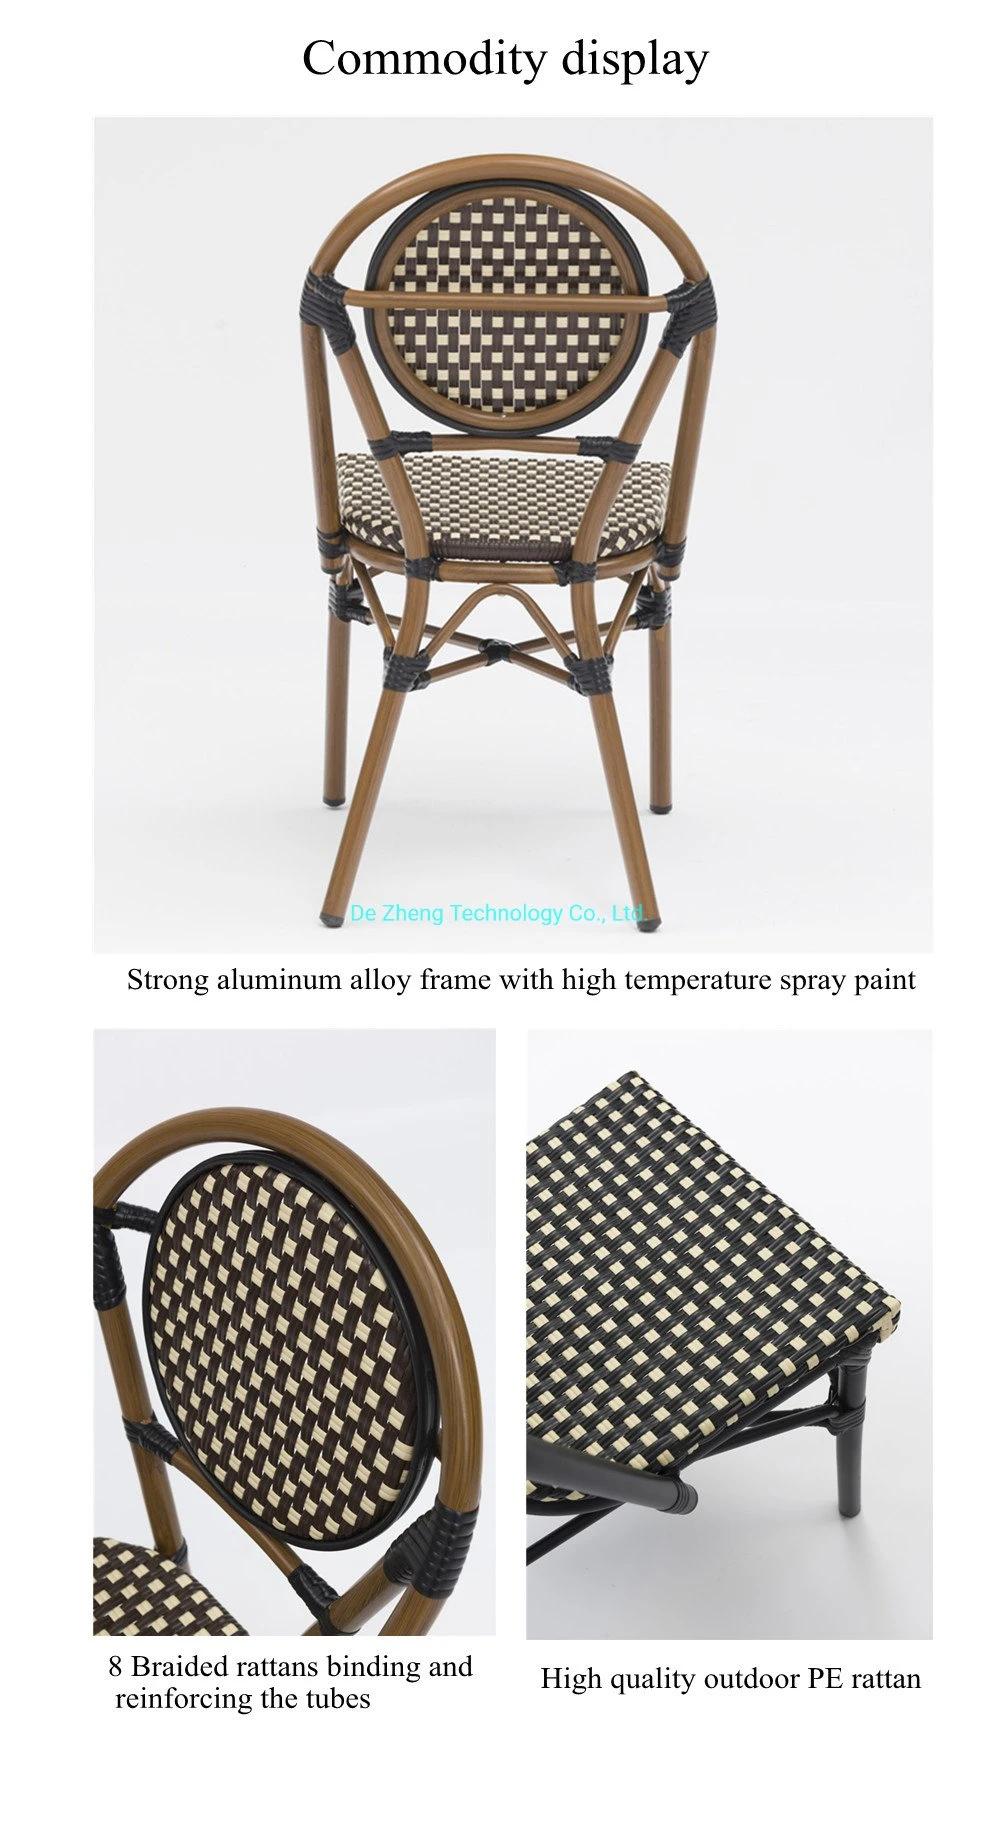 New Wholesale Stackbale Outdoor Bamboo Look Cane Chair All Weather Rattan Wicker Garden Furniture Set Bistro Patio Cafe Chairs